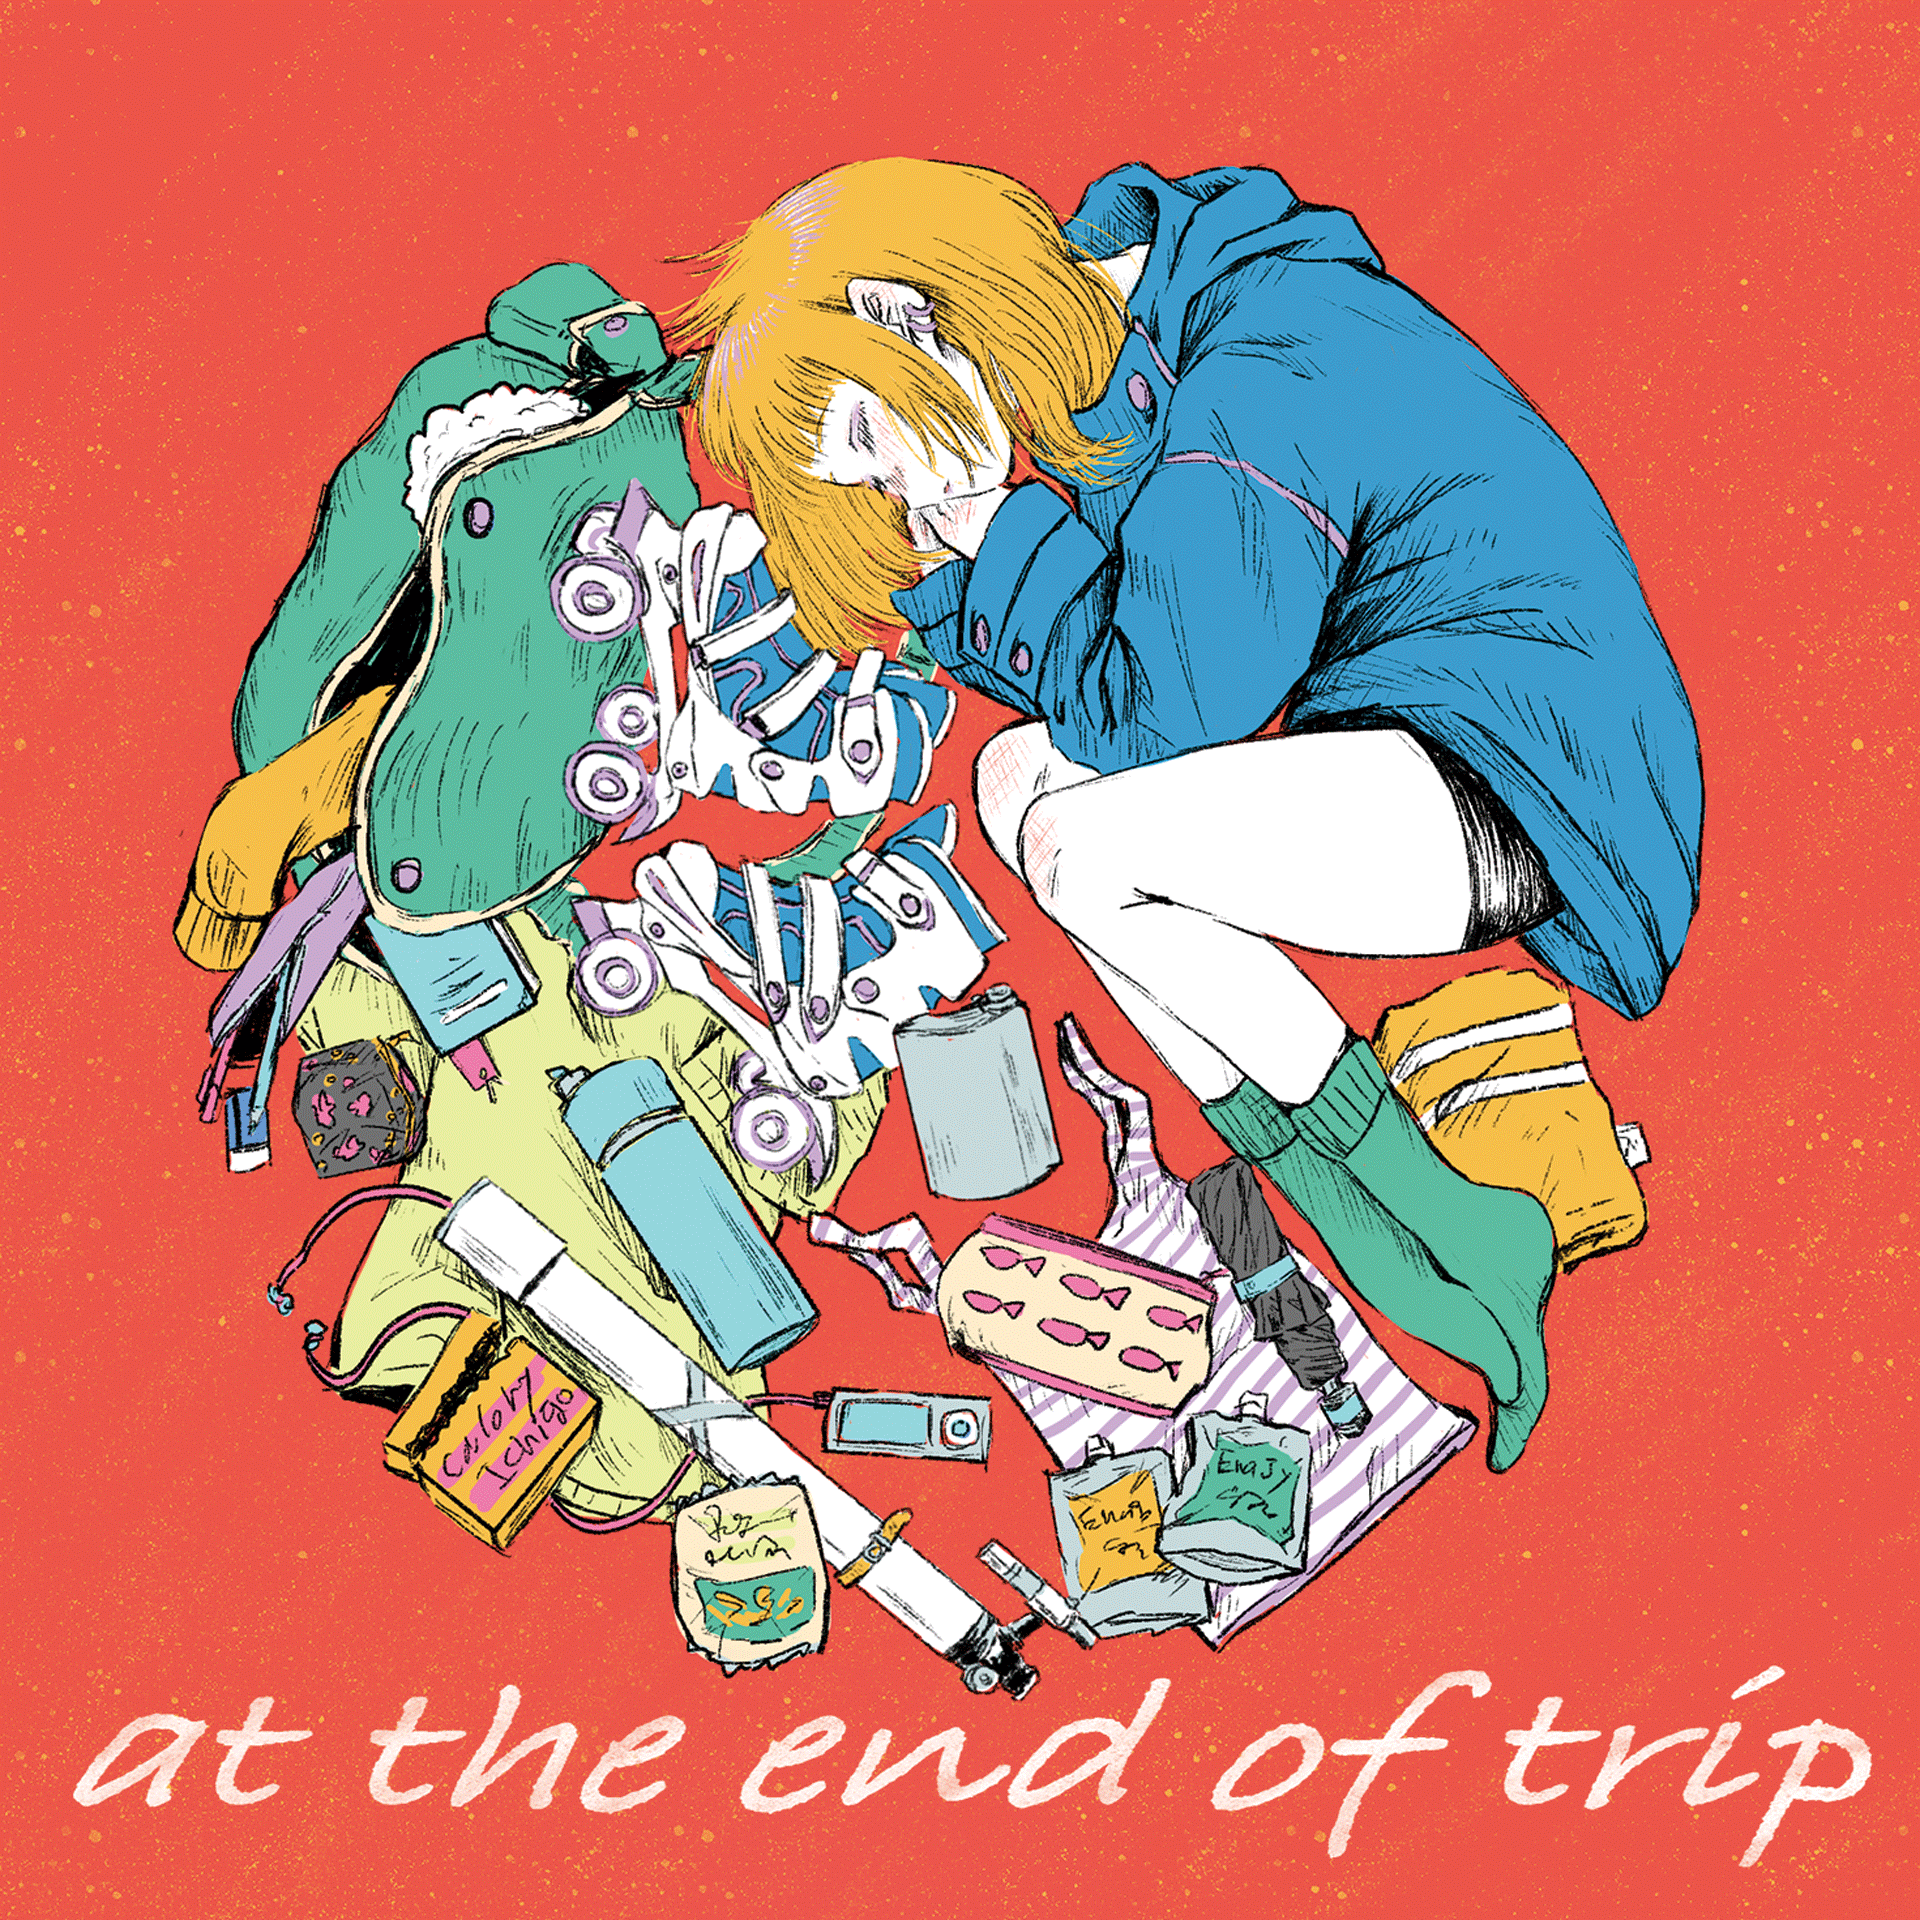 at the end of trip